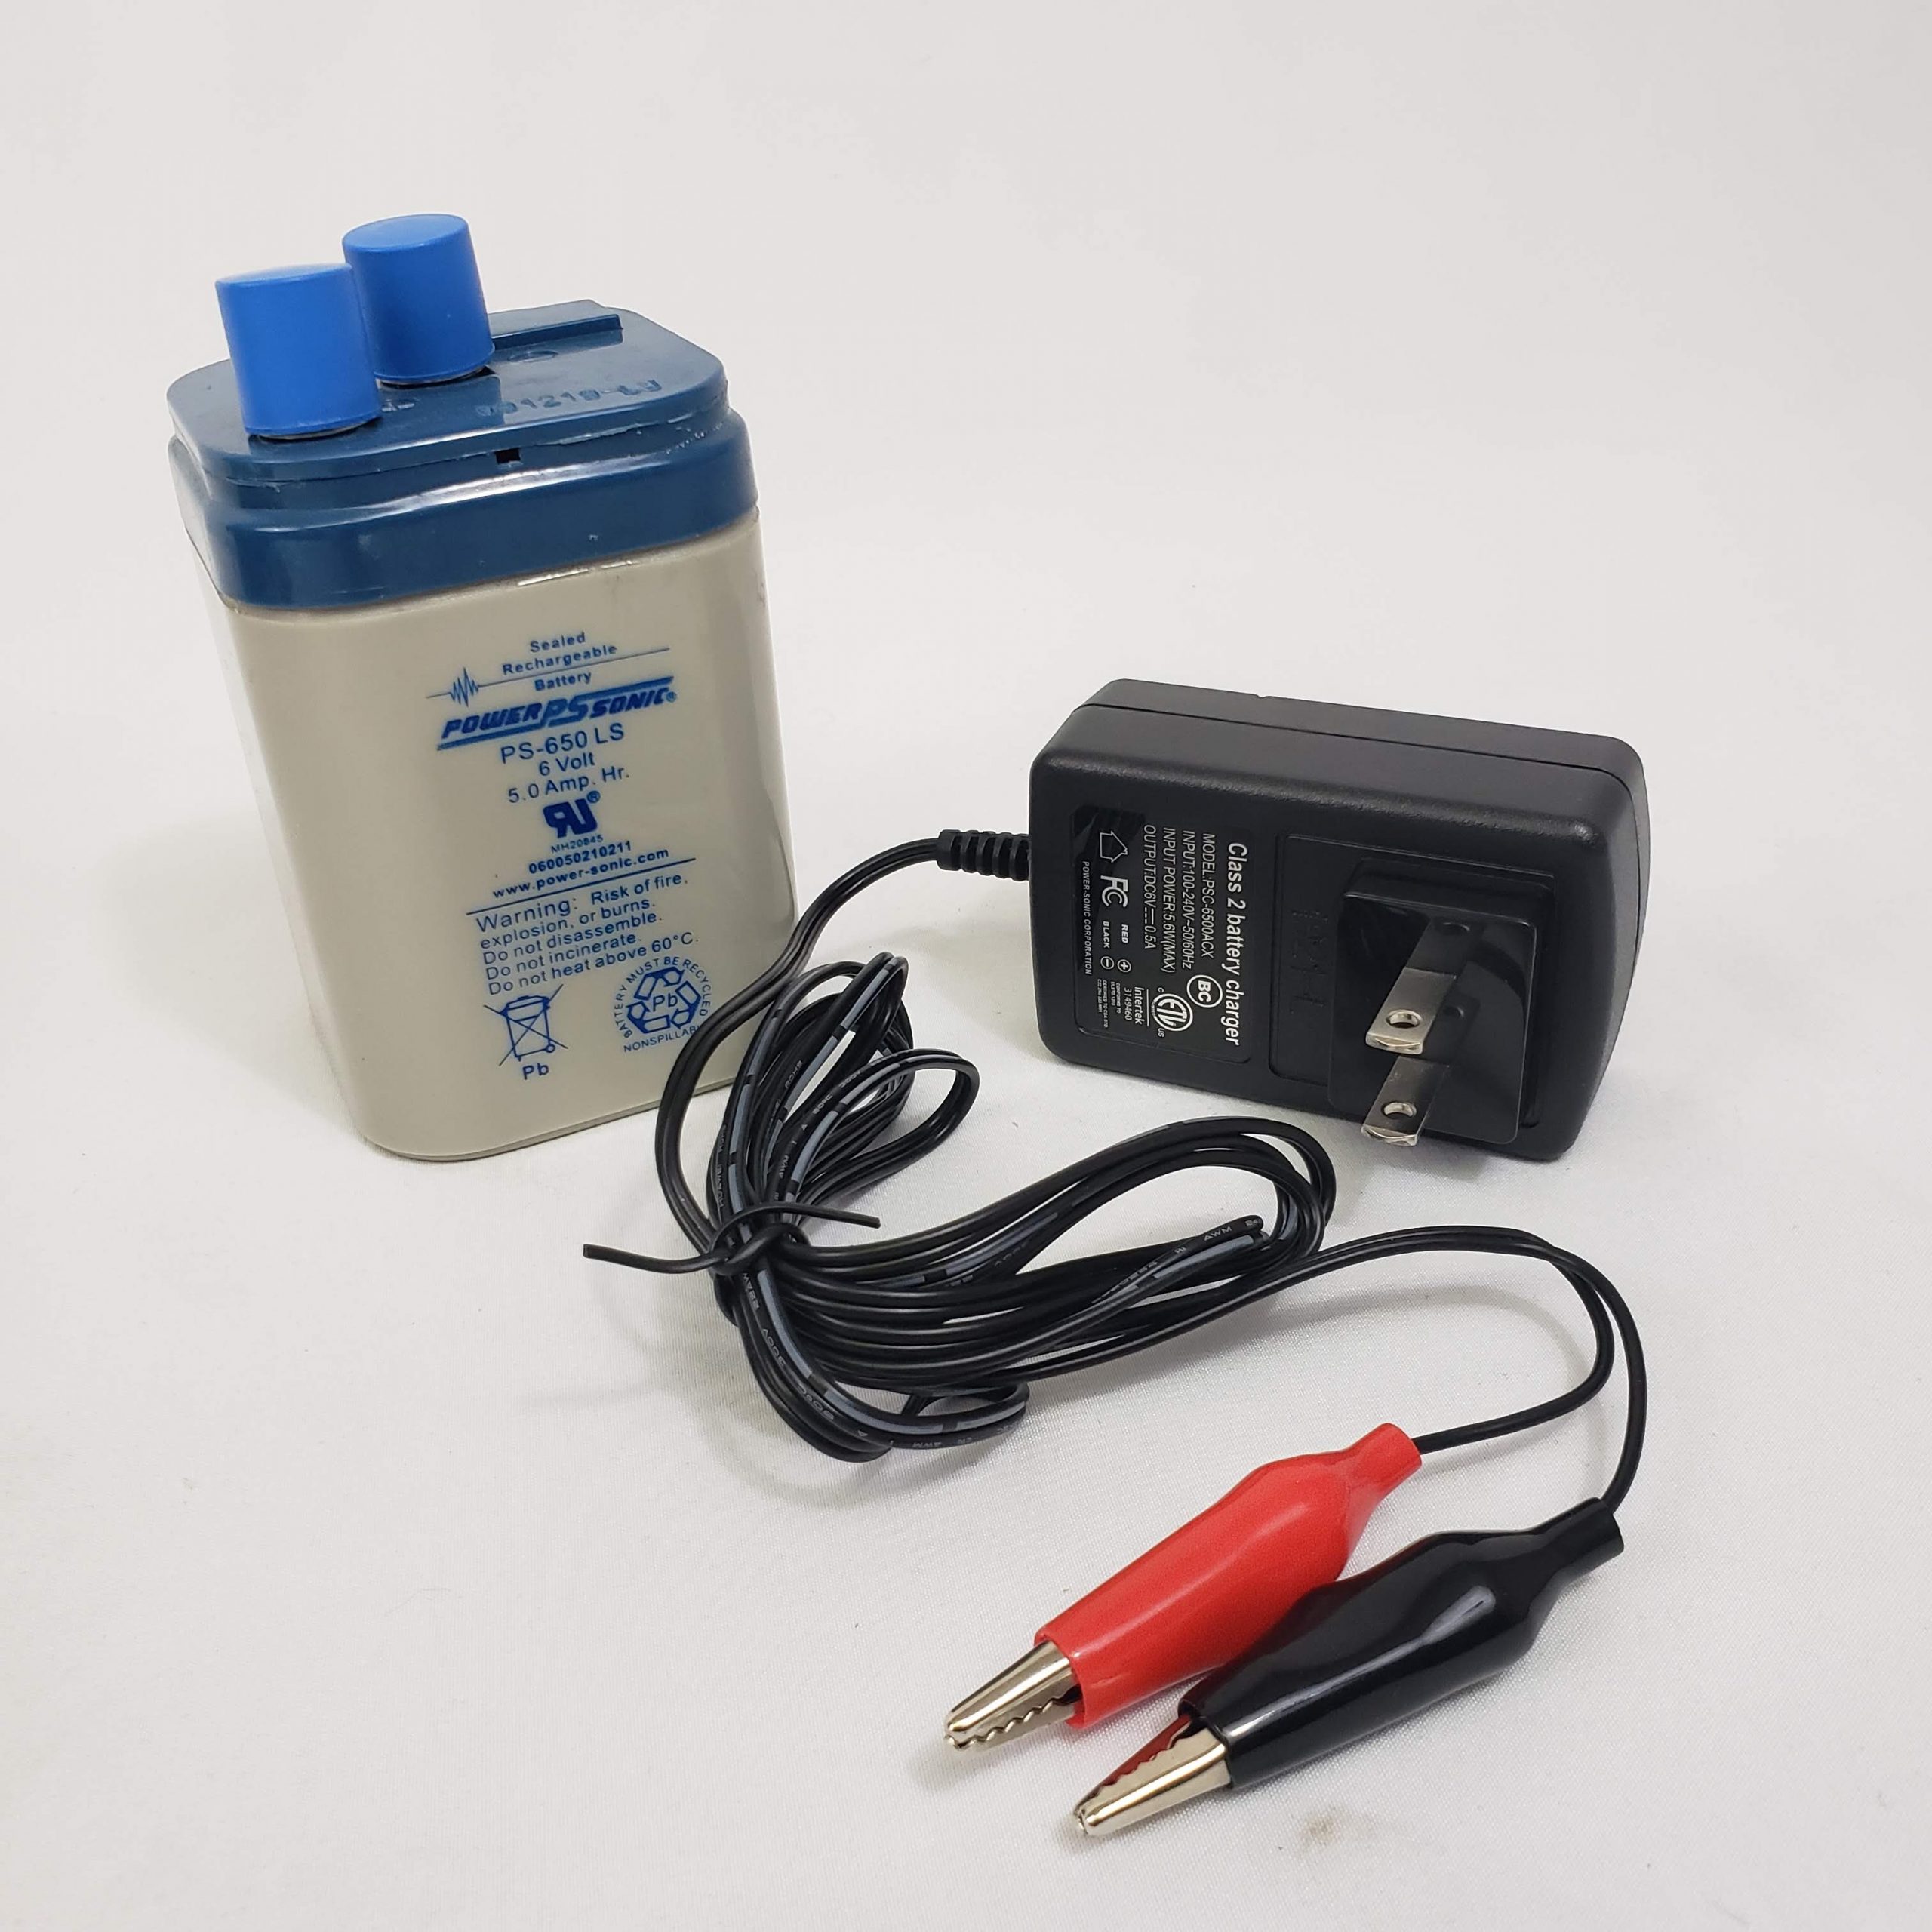 Railroad Tools and Solutions, Inc.  LANTERN BATTERY CHARGER 6 VOLT: 4 LBS.  - Railroad Tools and Solutions, Inc.